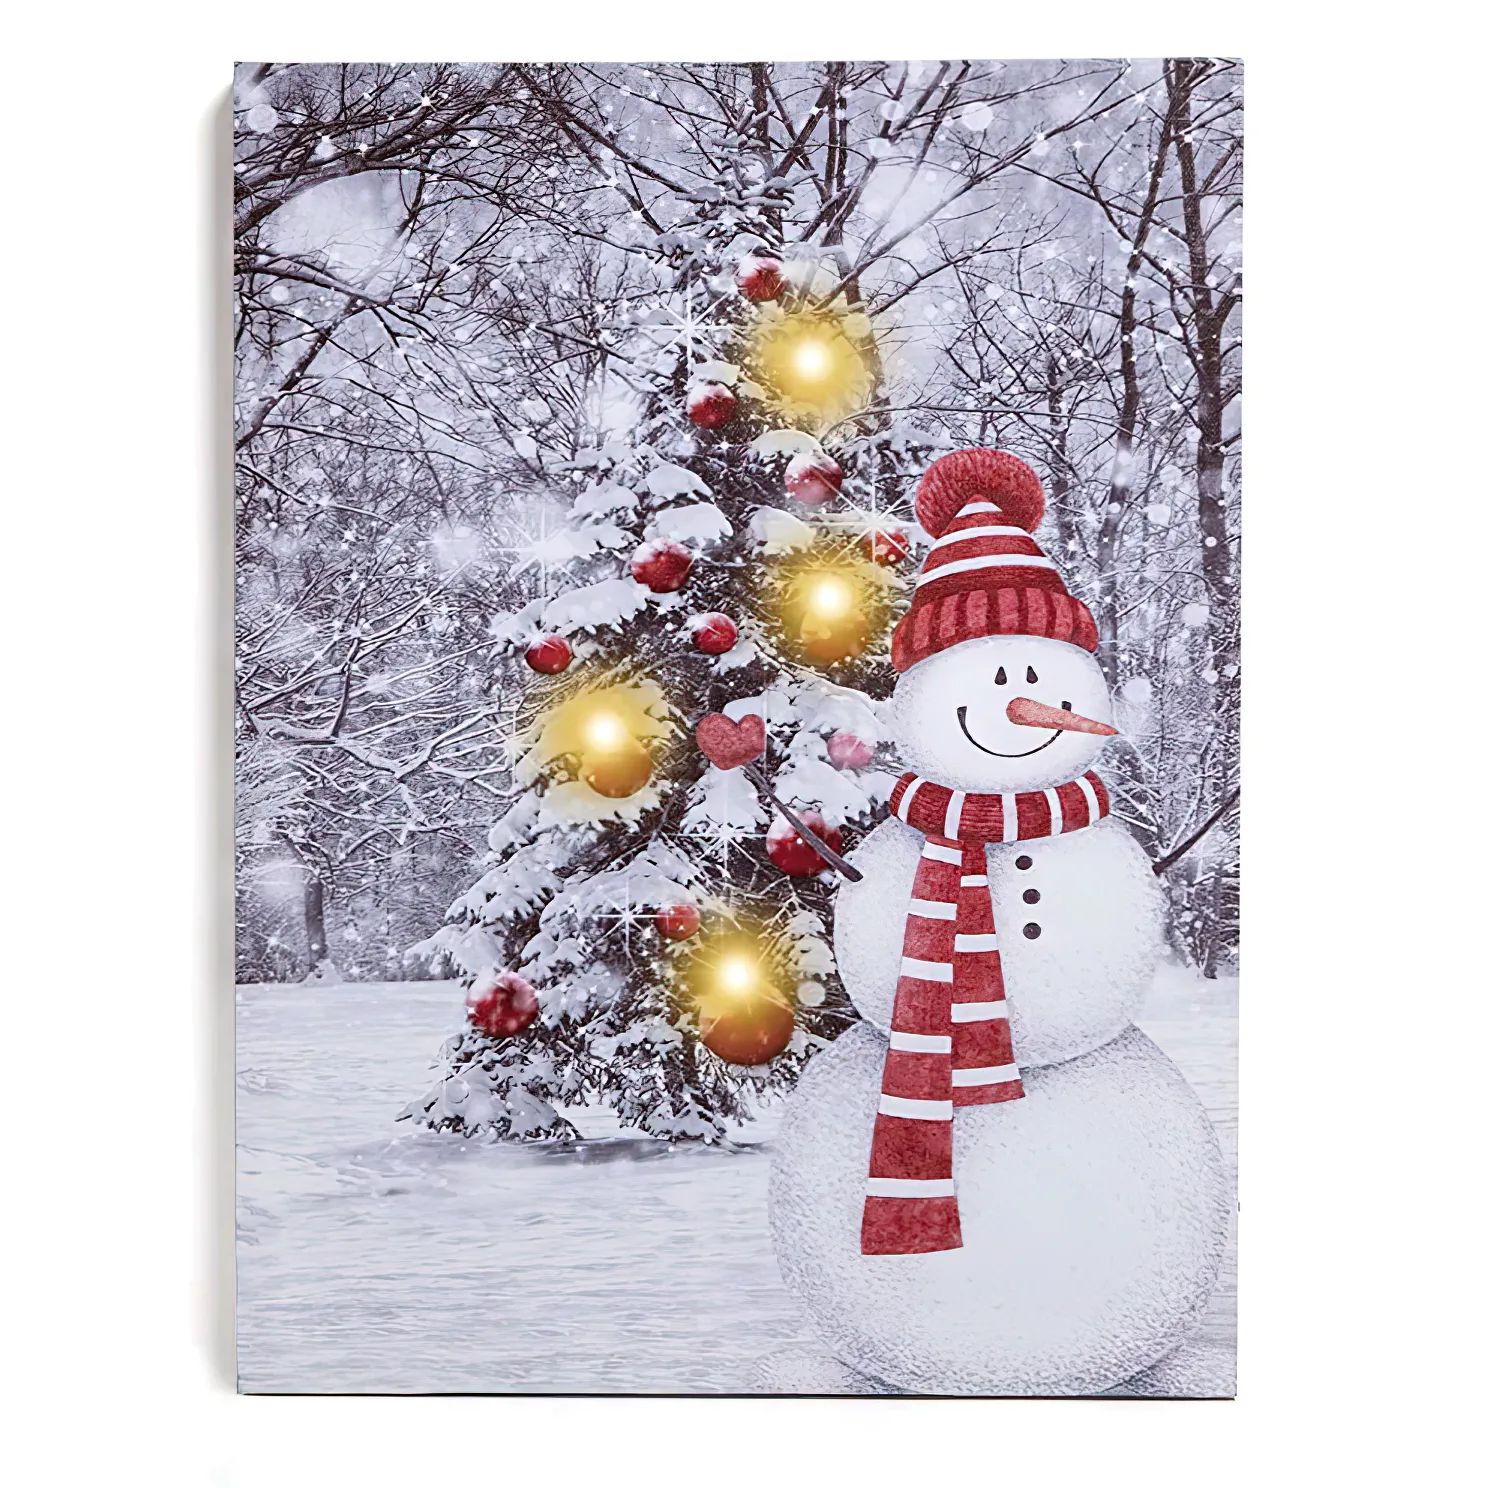 Holiday LED lighting canvas wall art prints with snowman and Christmas tree pictures decorative wall paintings